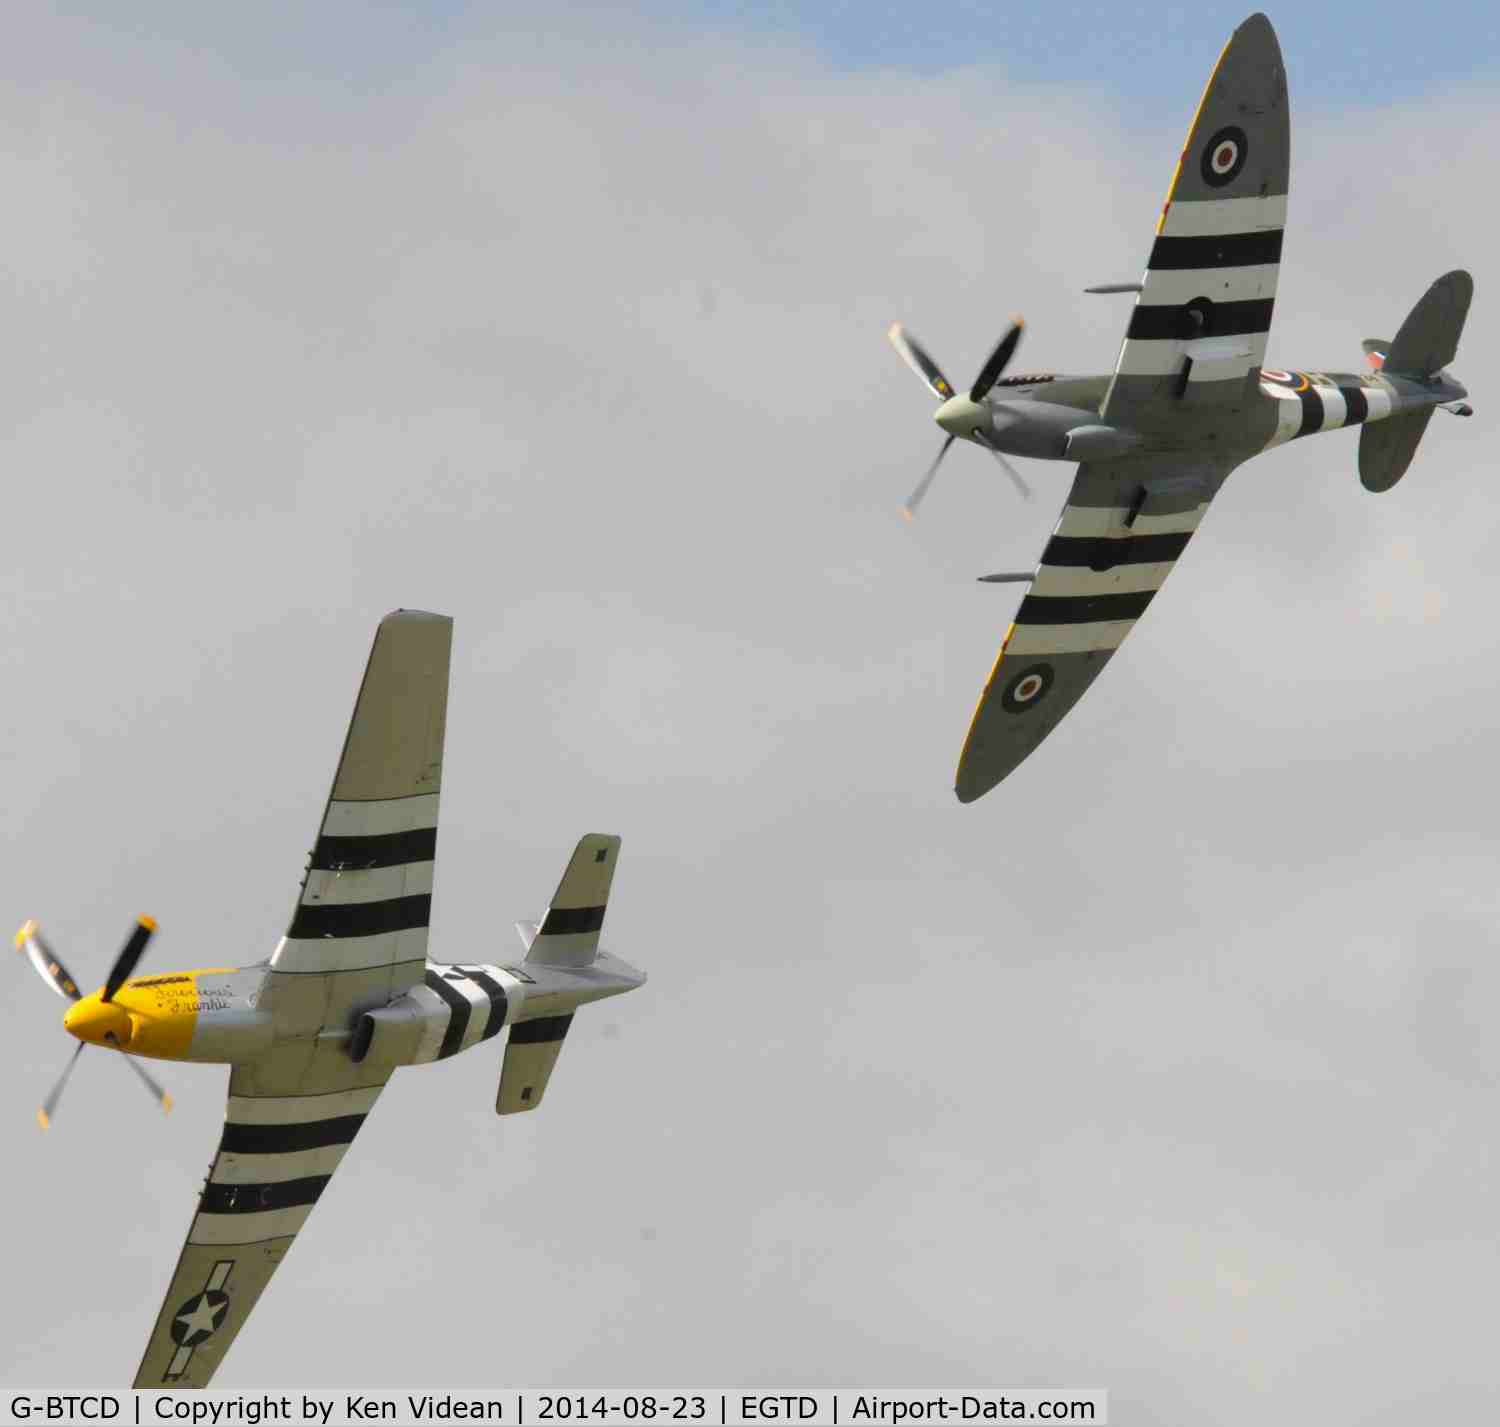 G-BTCD, 1944 North American P-51D Mustang C/N 122-39608, In formation with G-AIST